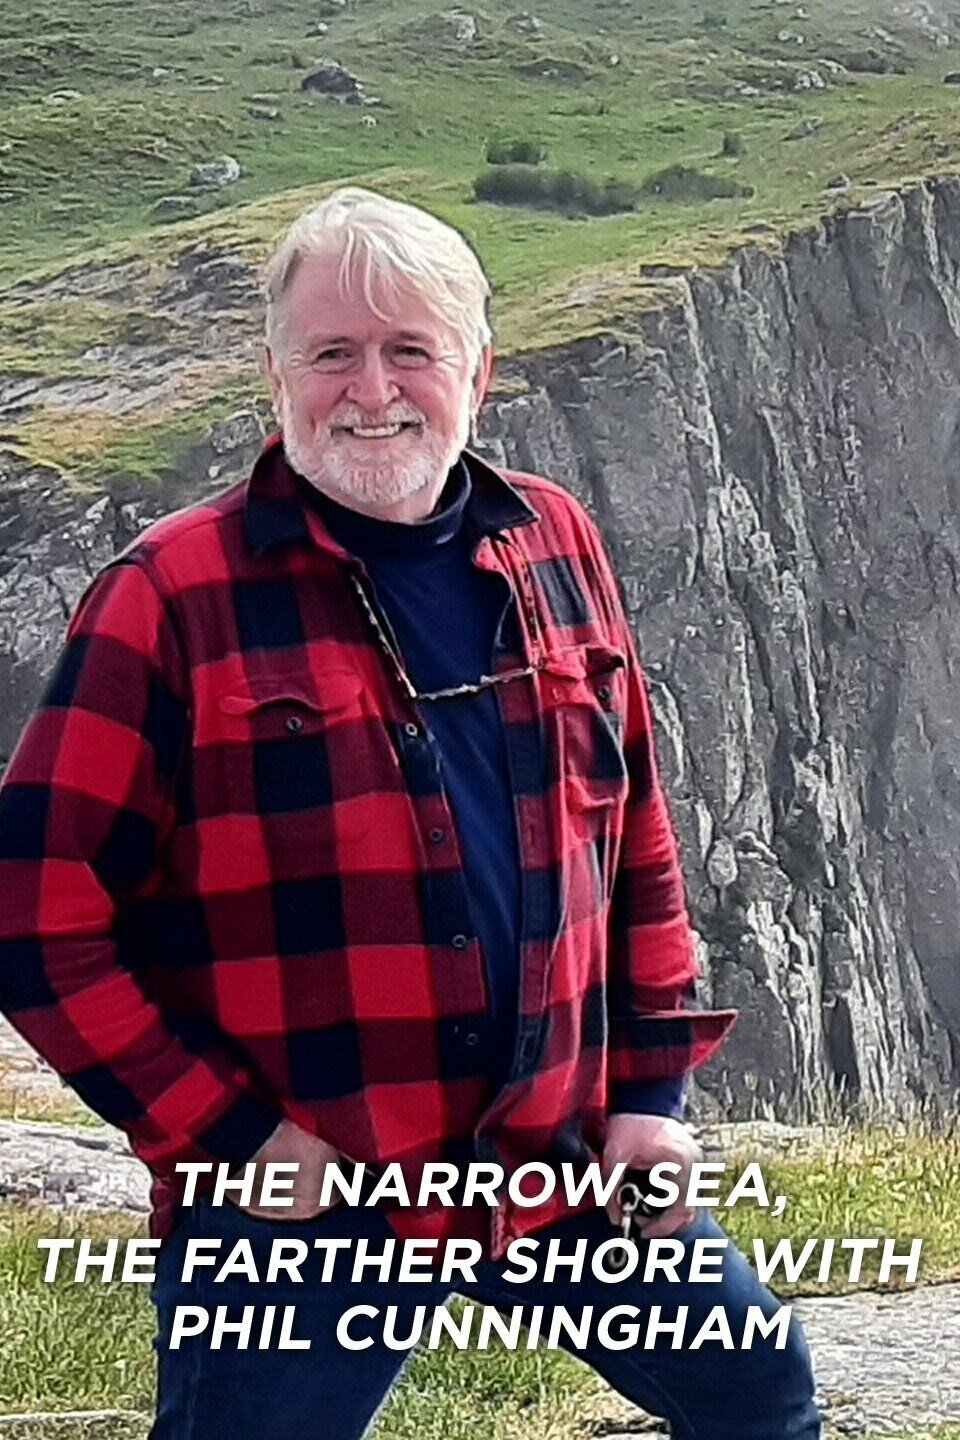 The Narrow Sea, The Farther Shore with Phil Cunningham ne zaman